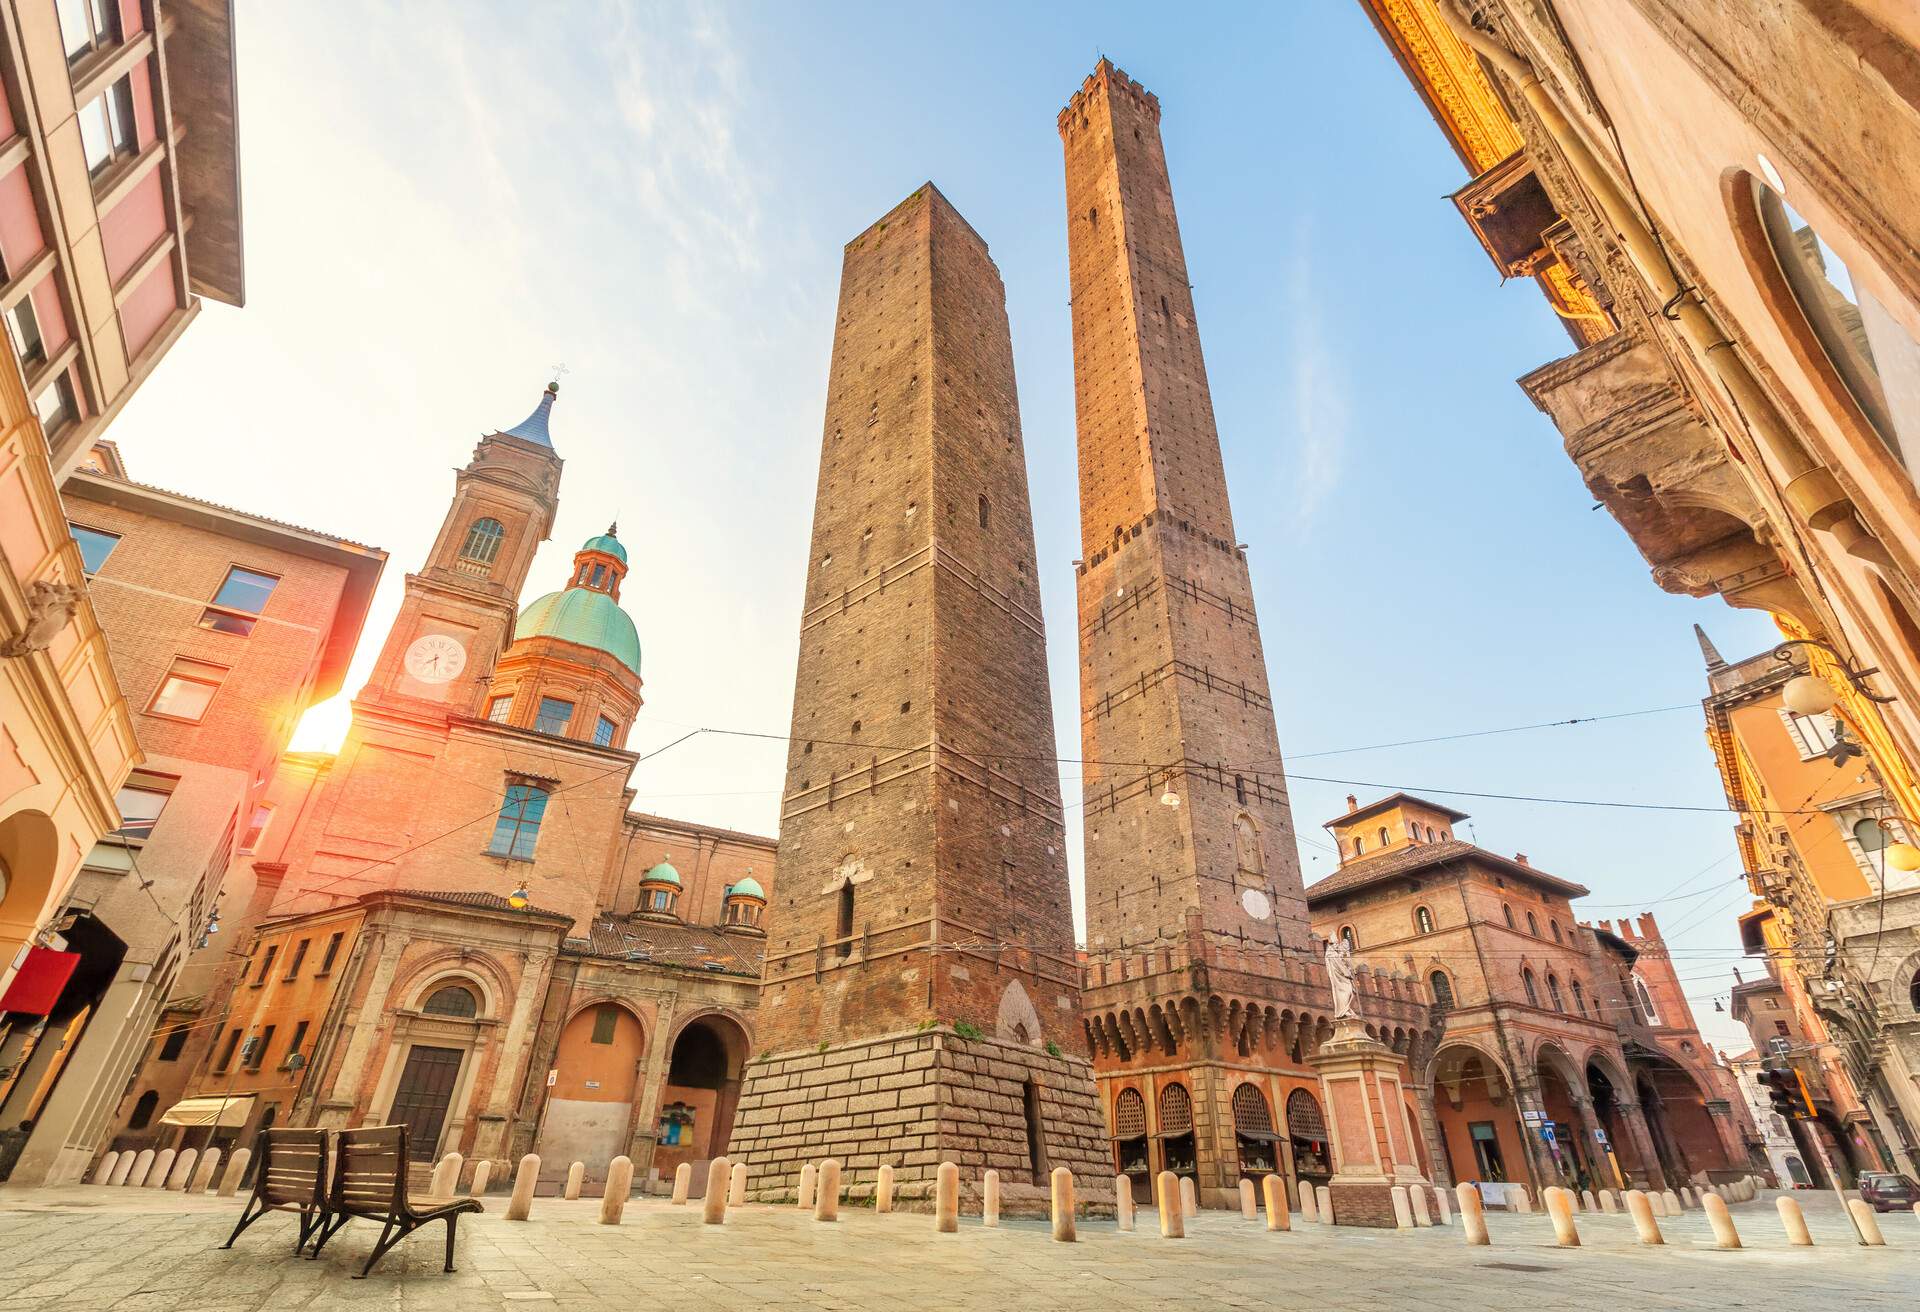 Two famous falling towers Asinelli and Garisenda in the morning, Bologna, Emilia-Romagna, Italy; Shutterstock ID 419143885